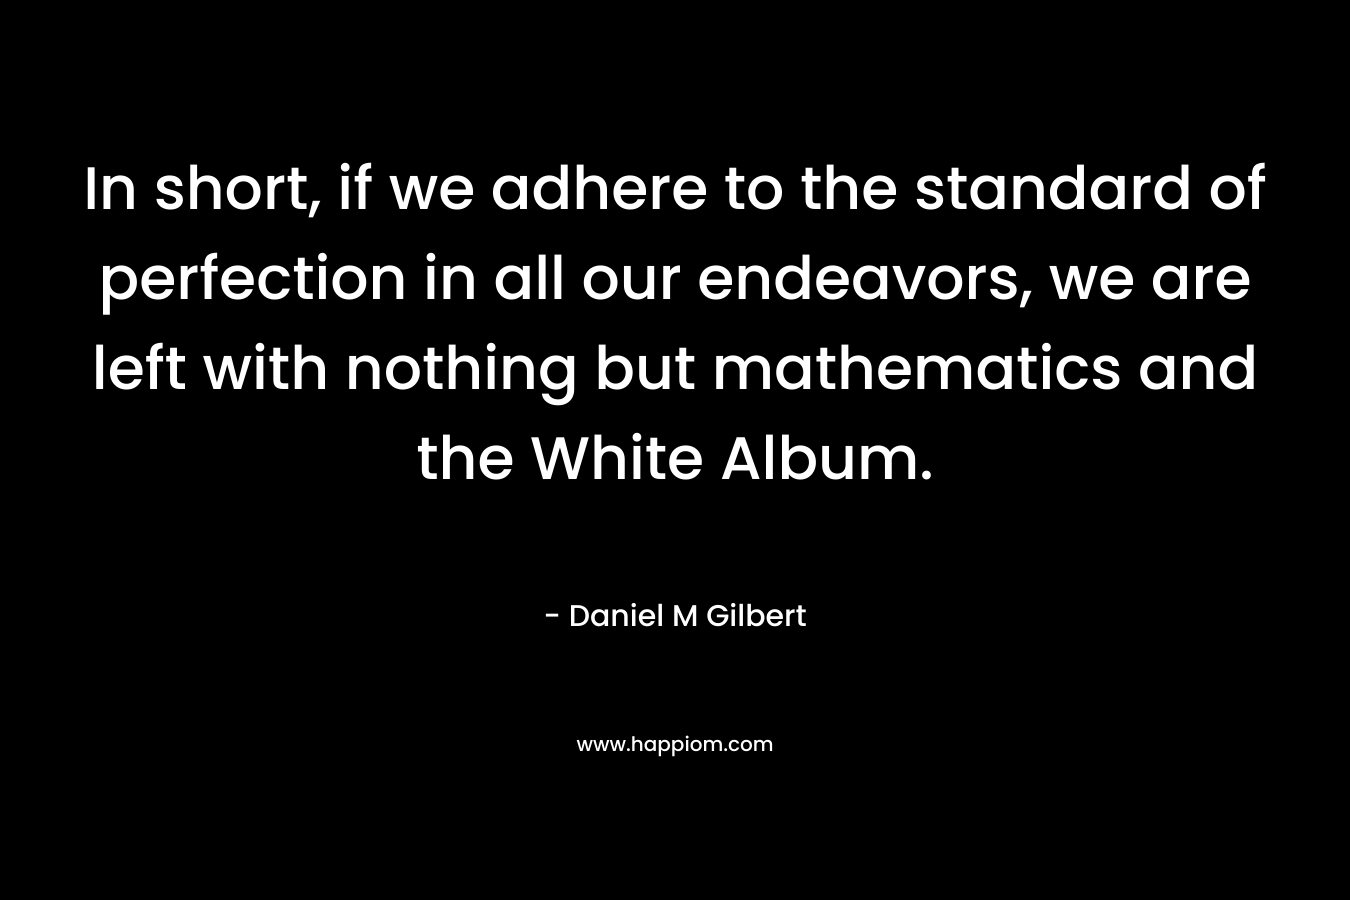 In short, if we adhere to the standard of perfection in all our endeavors, we are left with nothing but mathematics and the White Album.